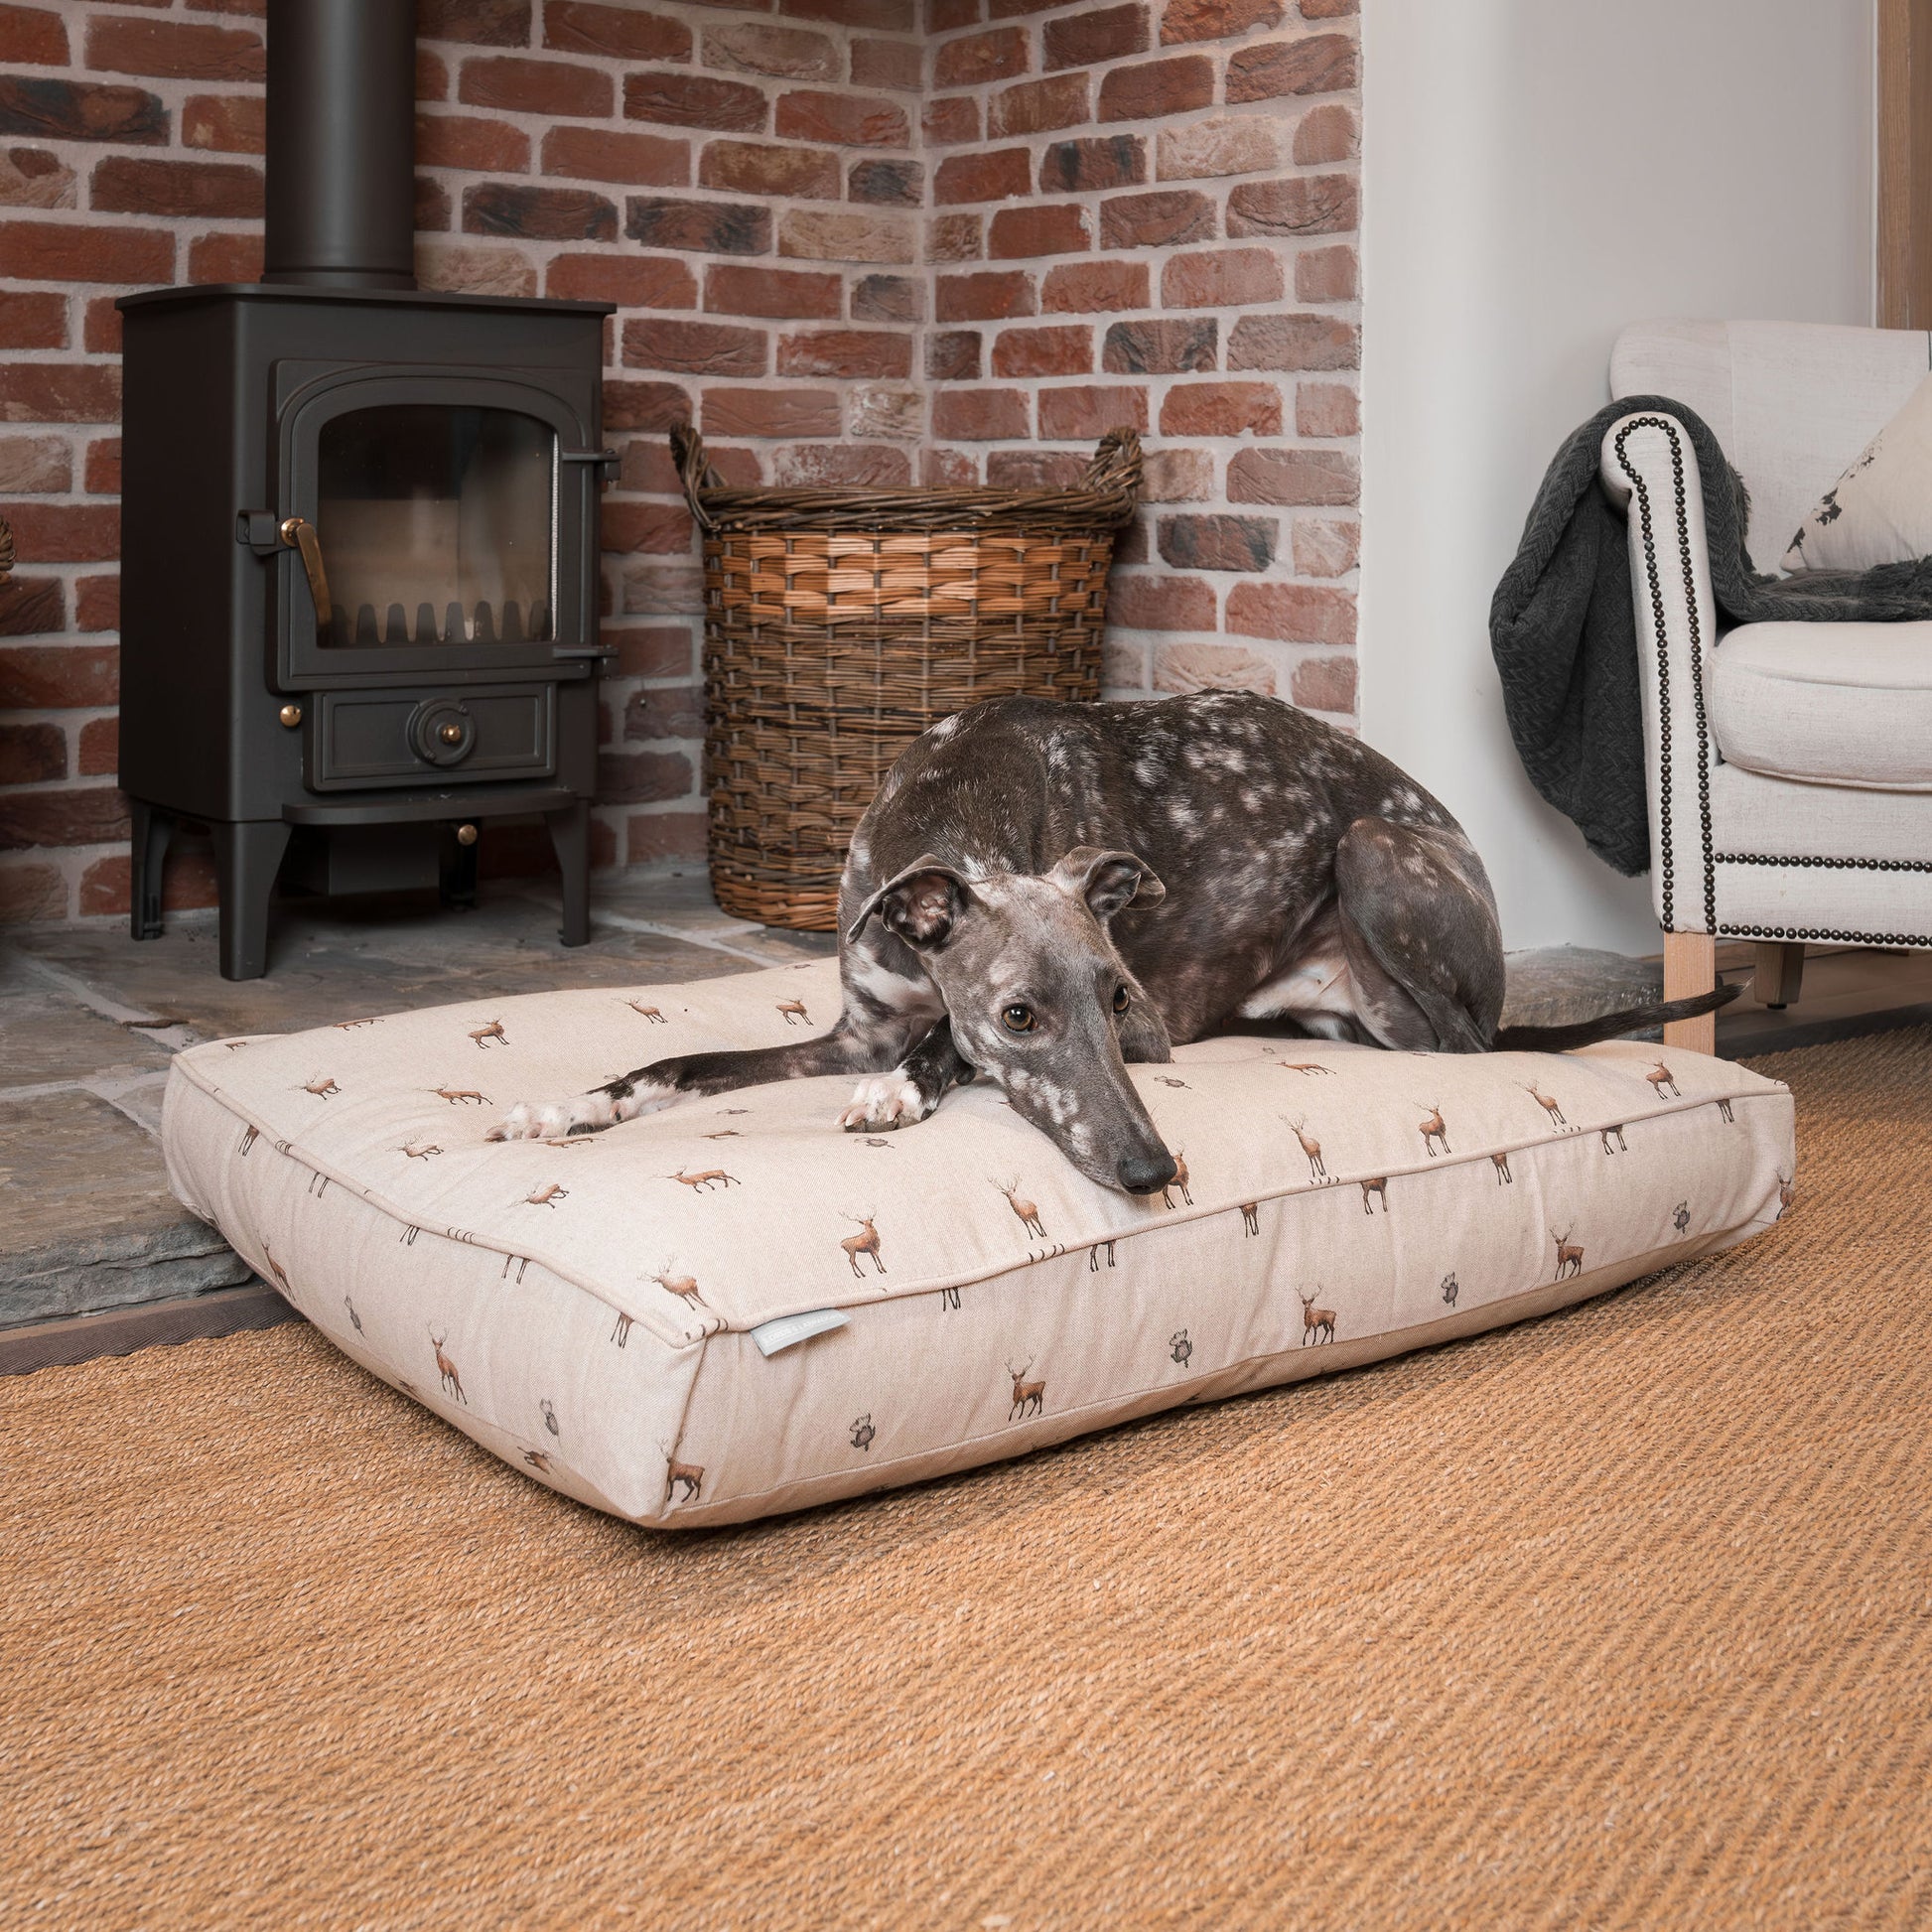 Luxury Woodland Dog Cushion, in Stag. Available For Pet Personalization, Handmade Here at Lords & Labradors US! Order The Perfect Pet Cushion Today For The Ultimate Burrow!